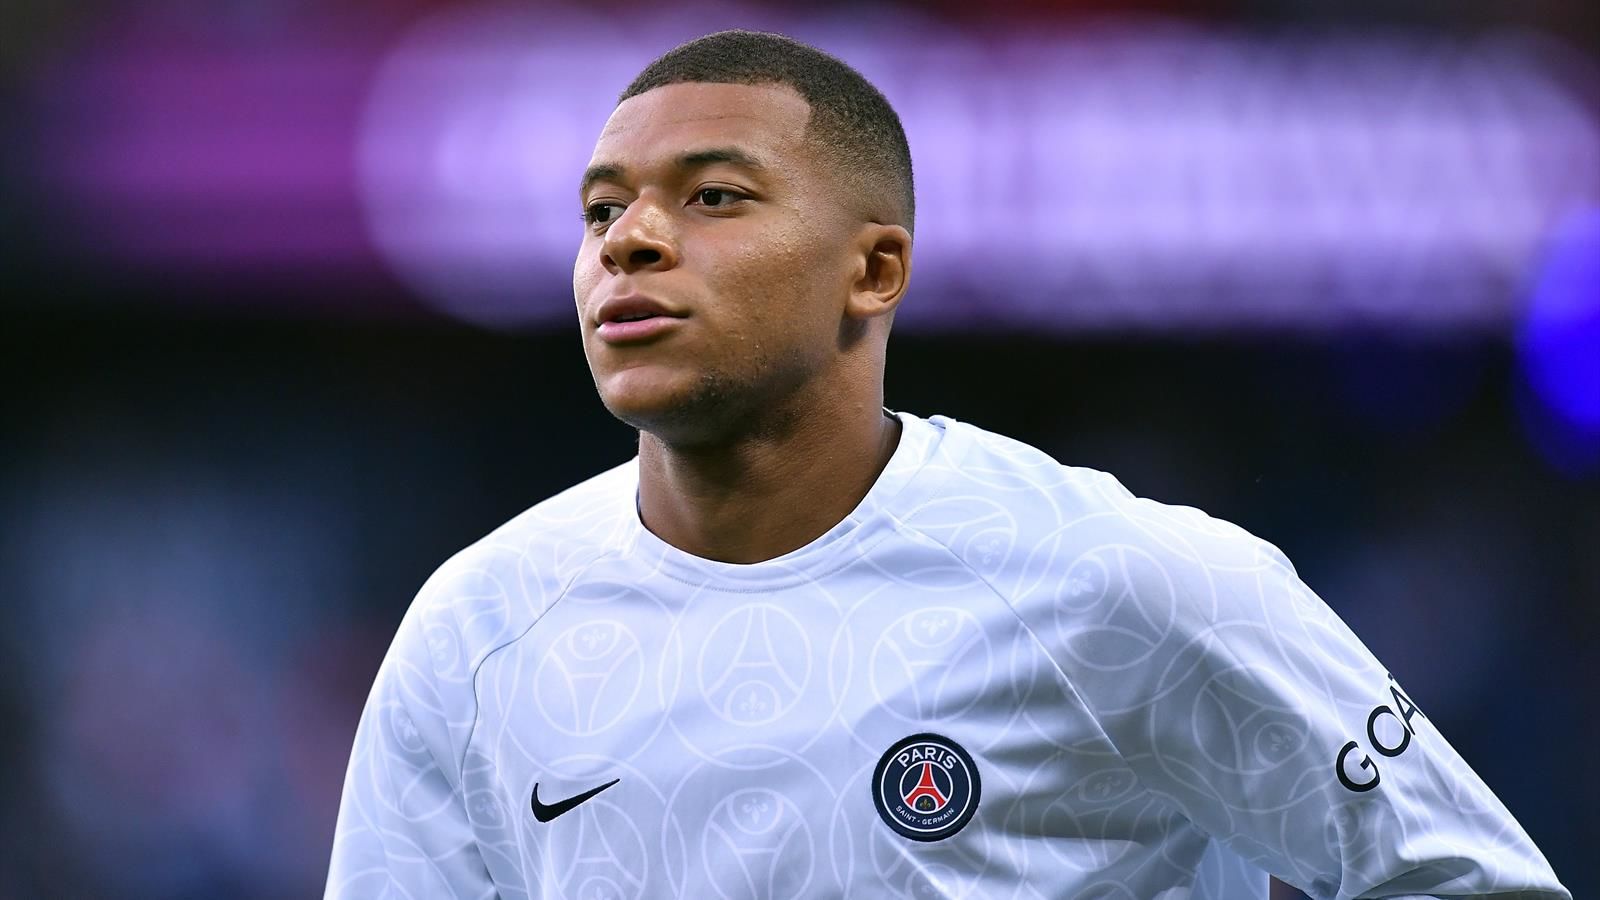 Mbappe wants to leave PSG during winter transfer window